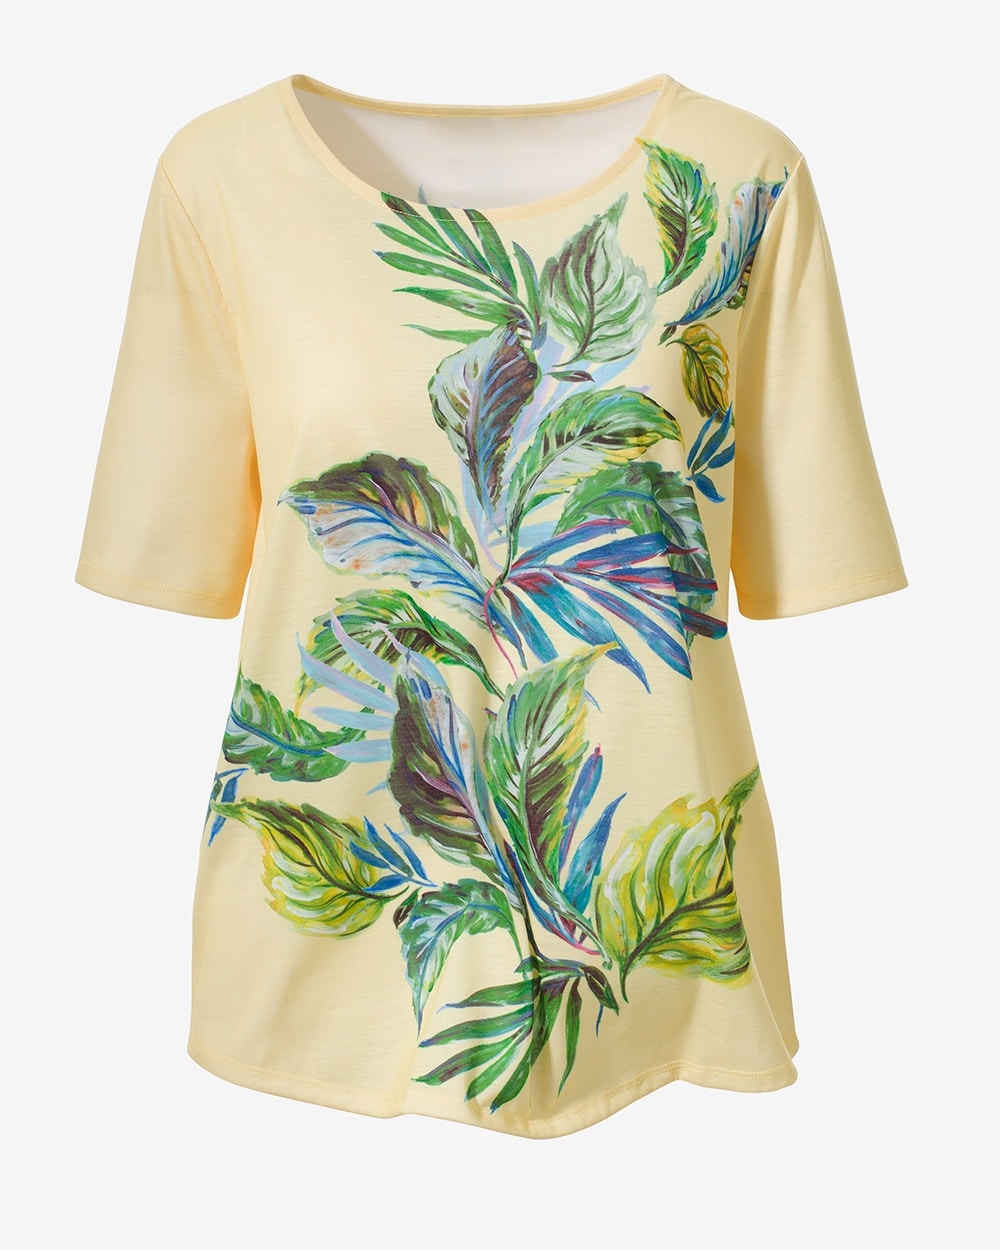 Breezy Leaves Scoop-Neck Shirttail Tee